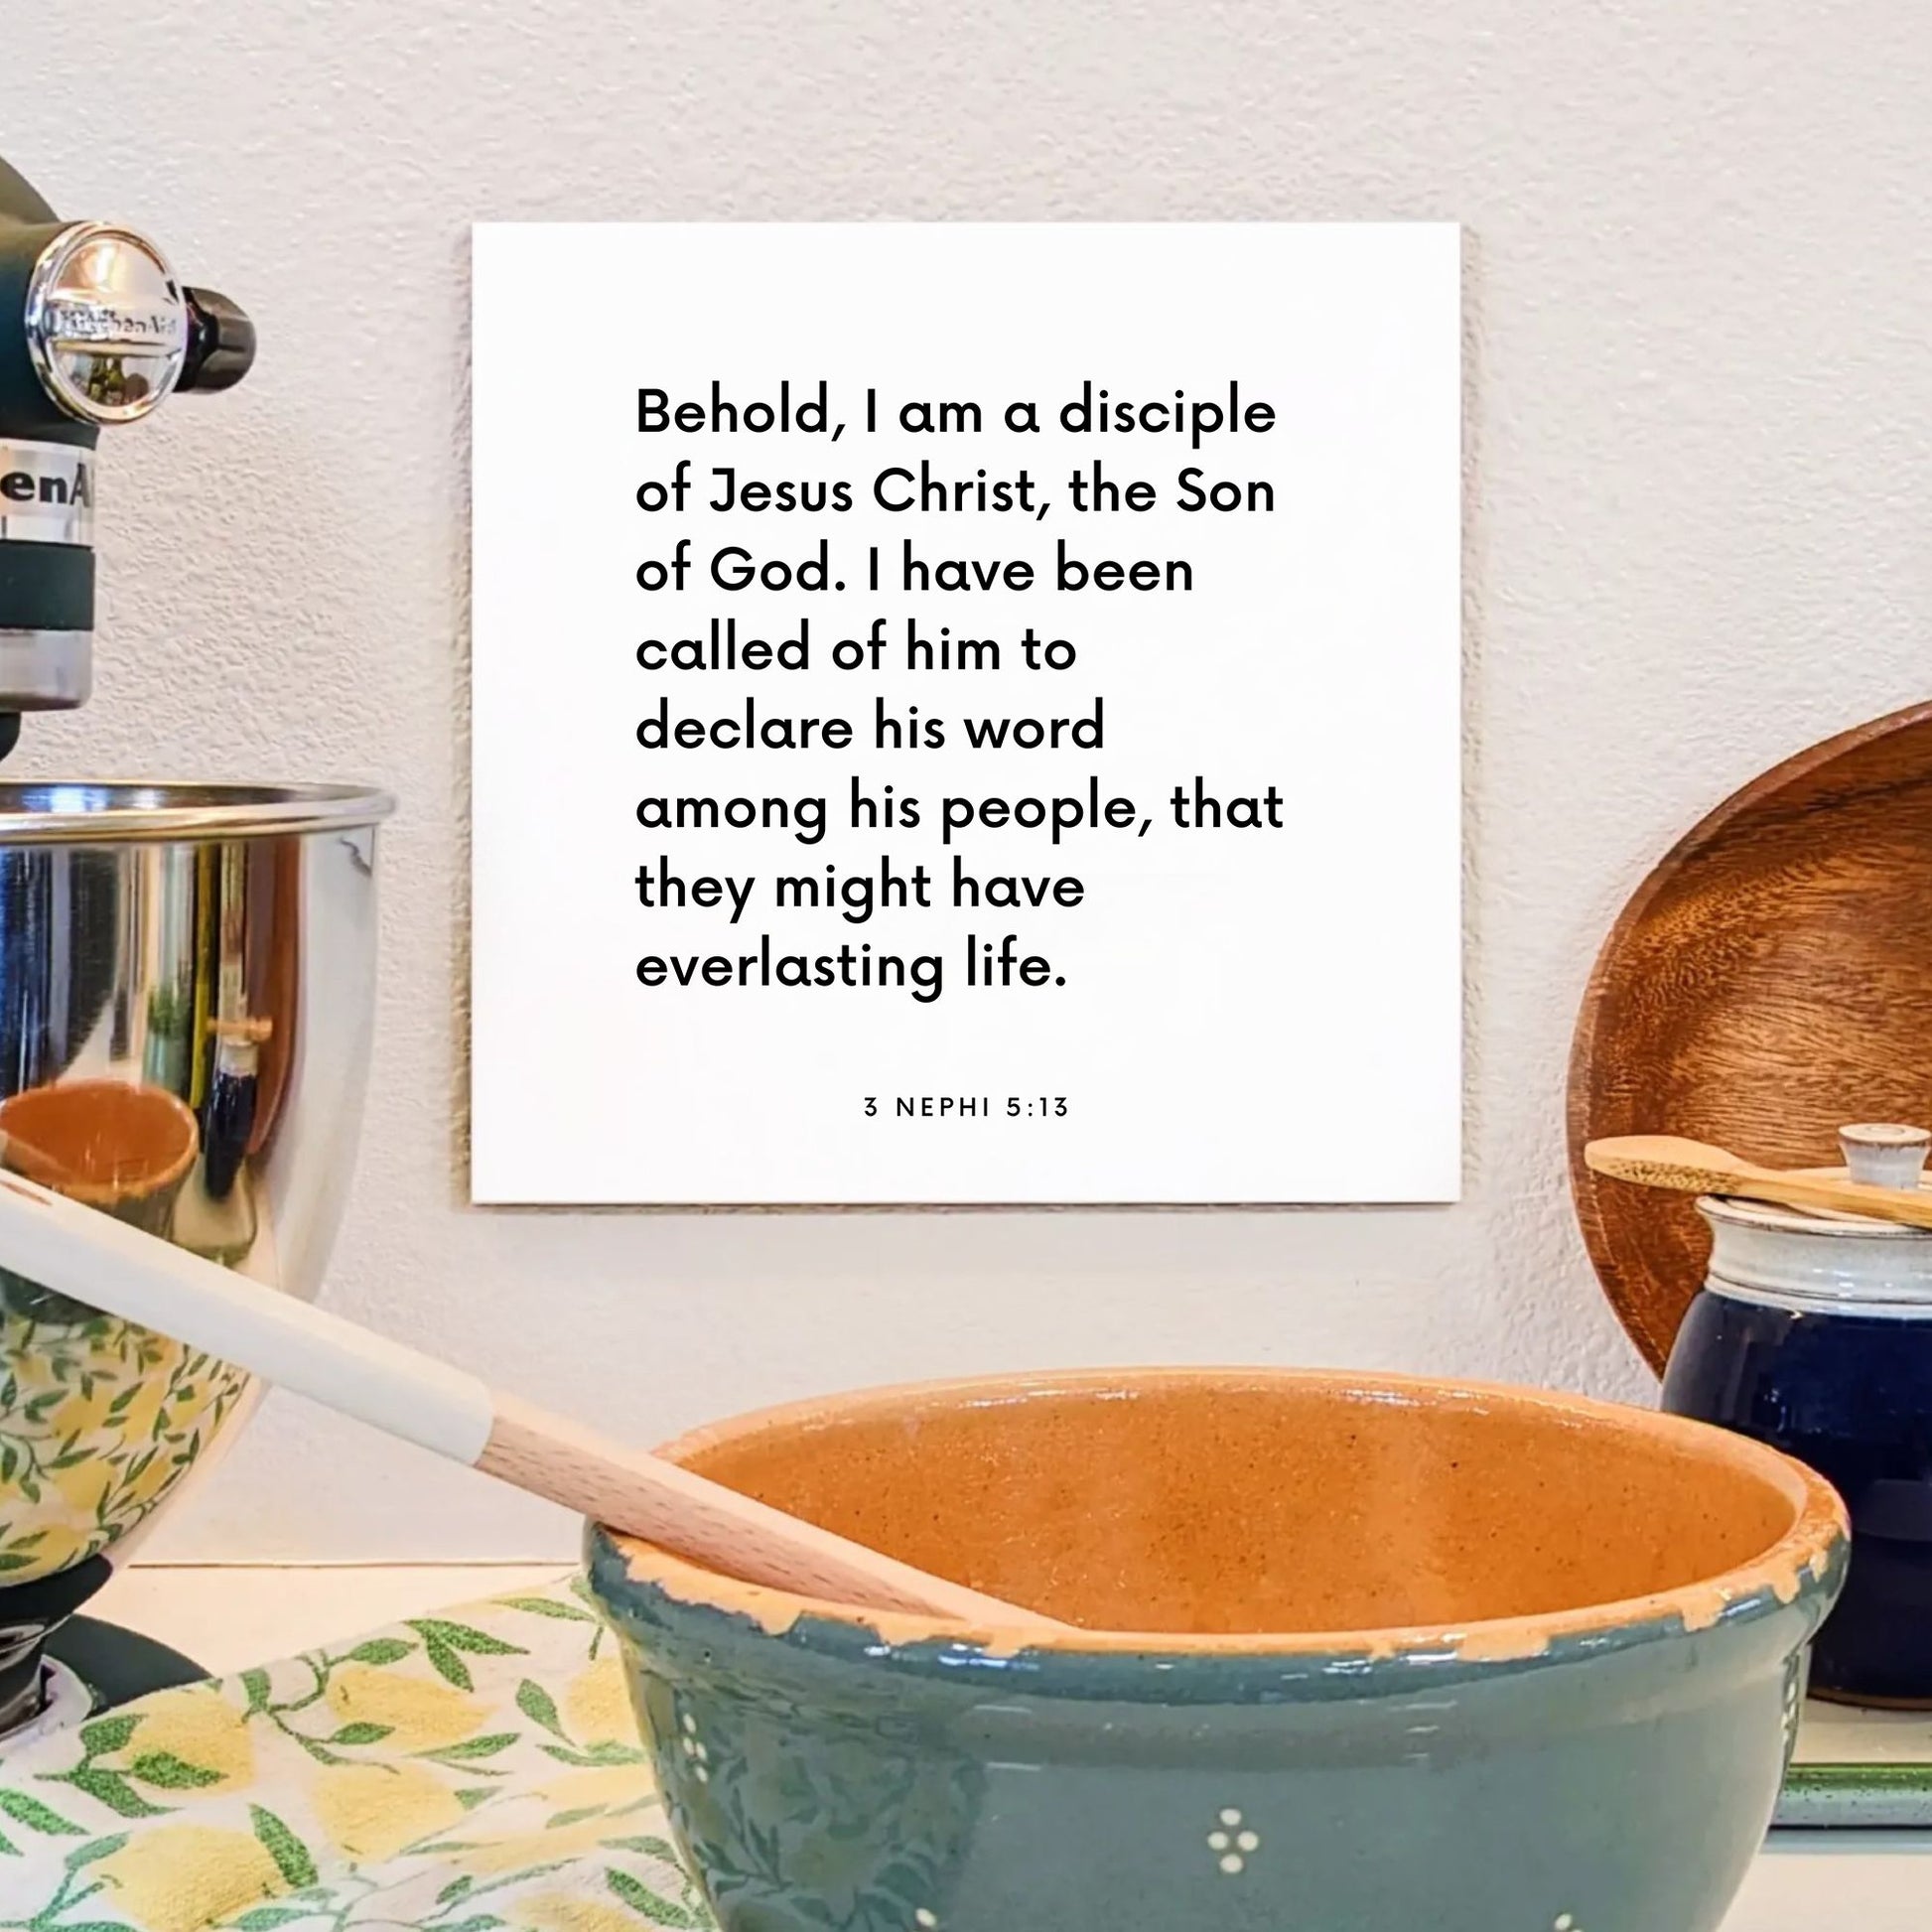 Kitchen mouting of the scripture tile for 3 Nephi 5:13 - "Behold, I am a disciple of Jesus Christ, the Son of God"